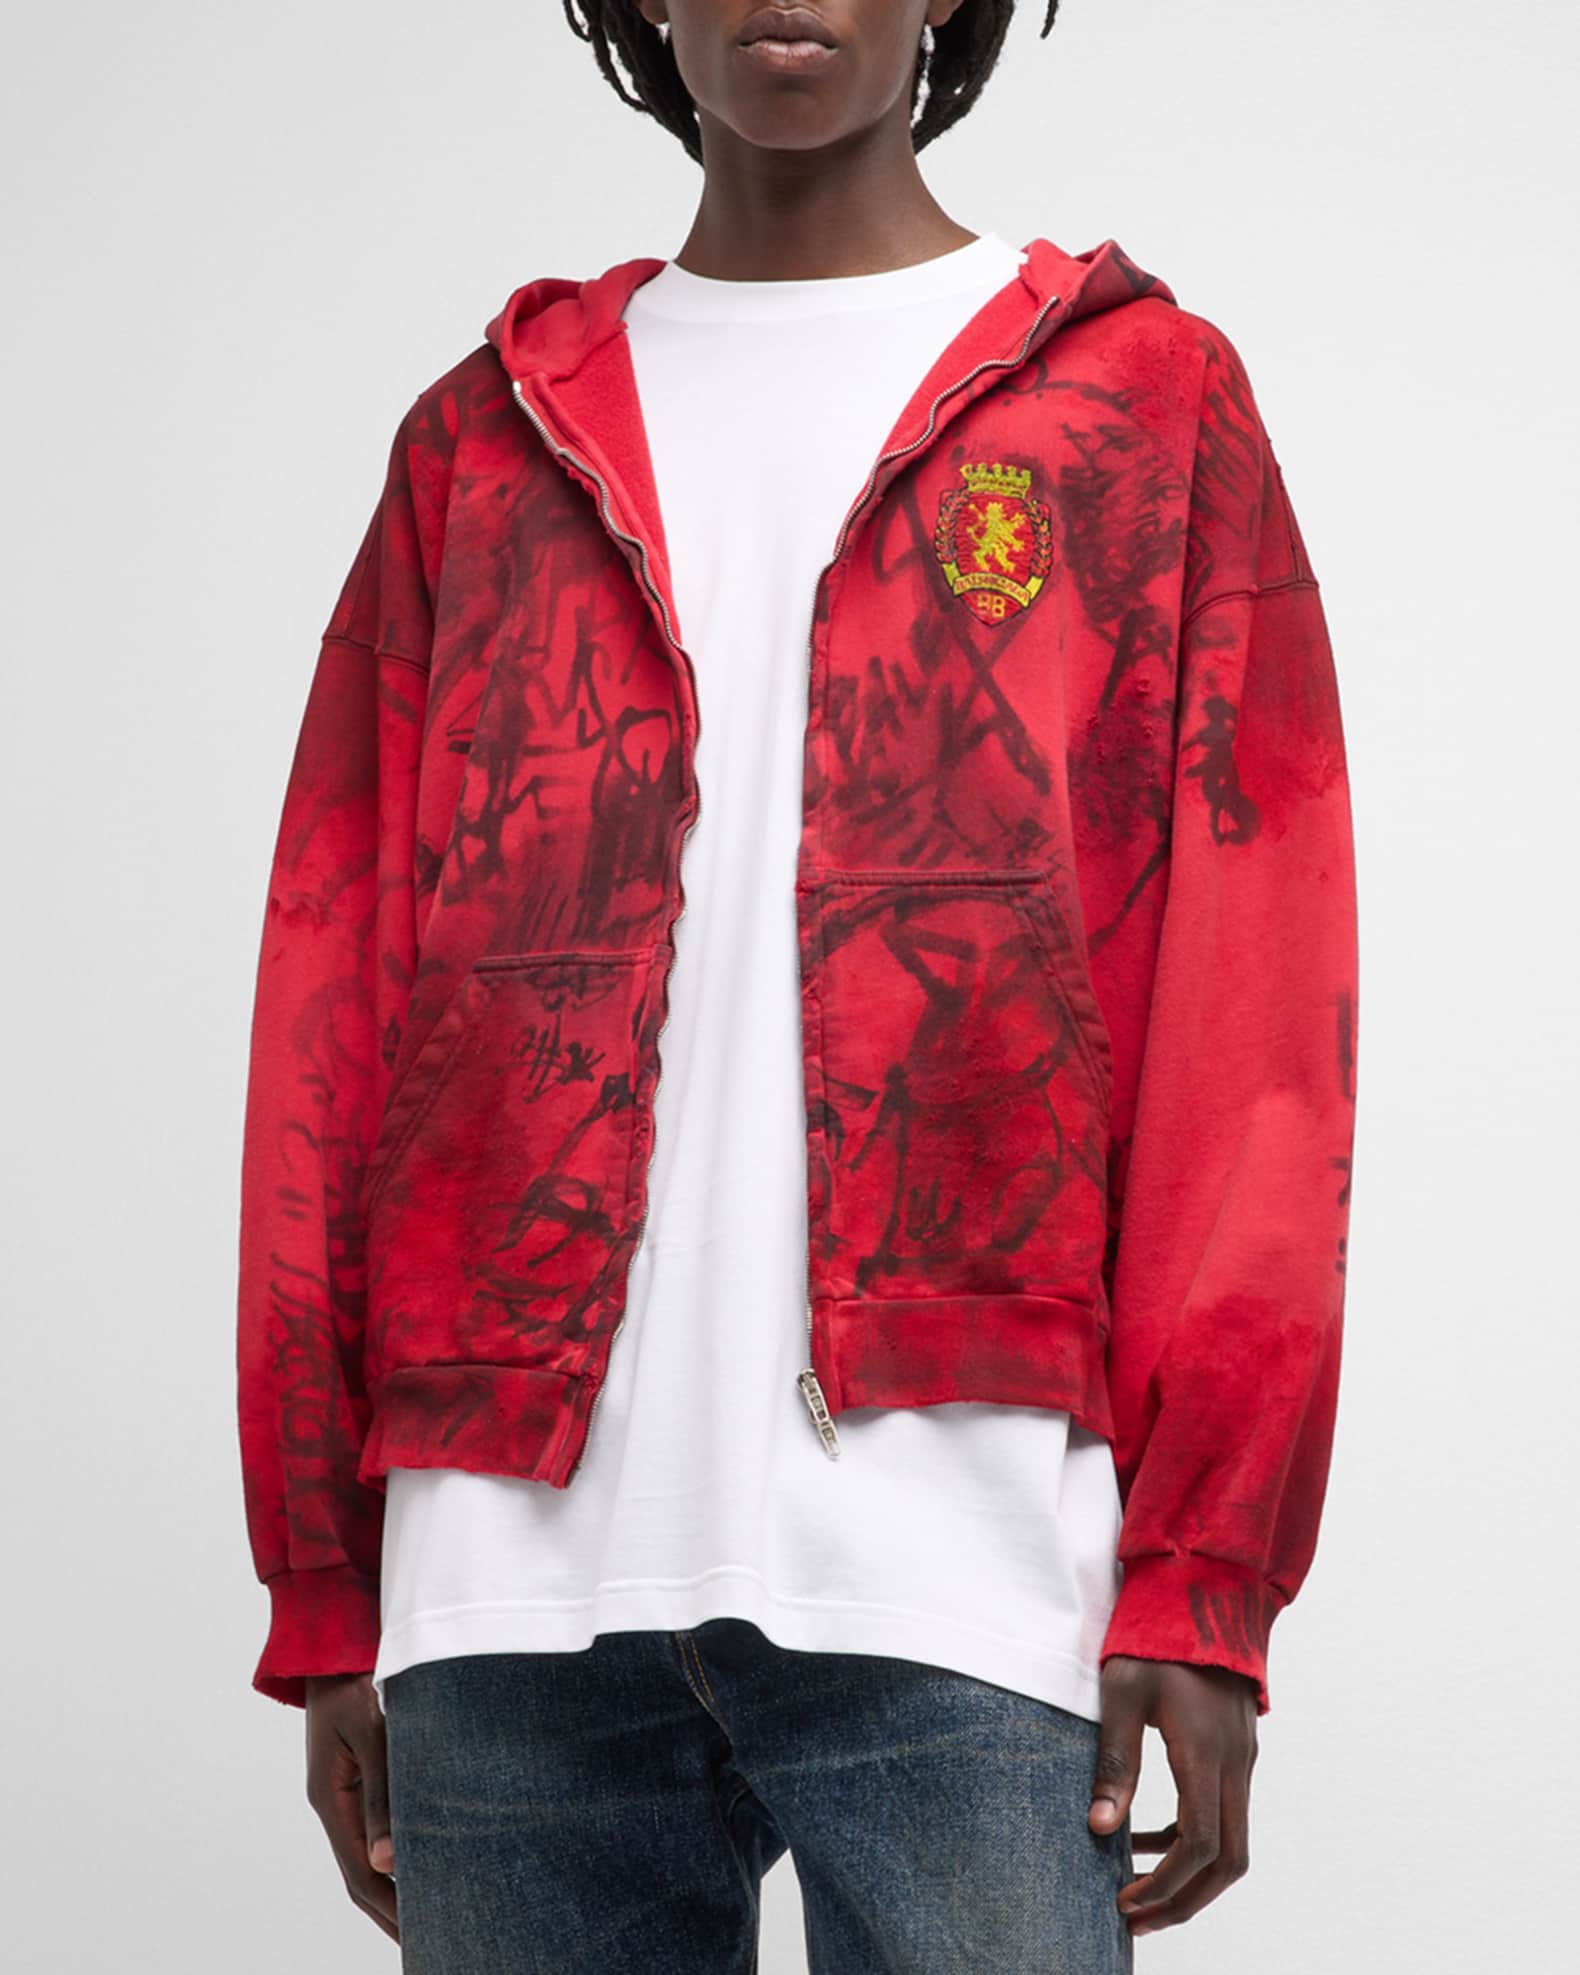 Louis Vuitton Men's Zip Through Hoodie Denim with Sash and Patches